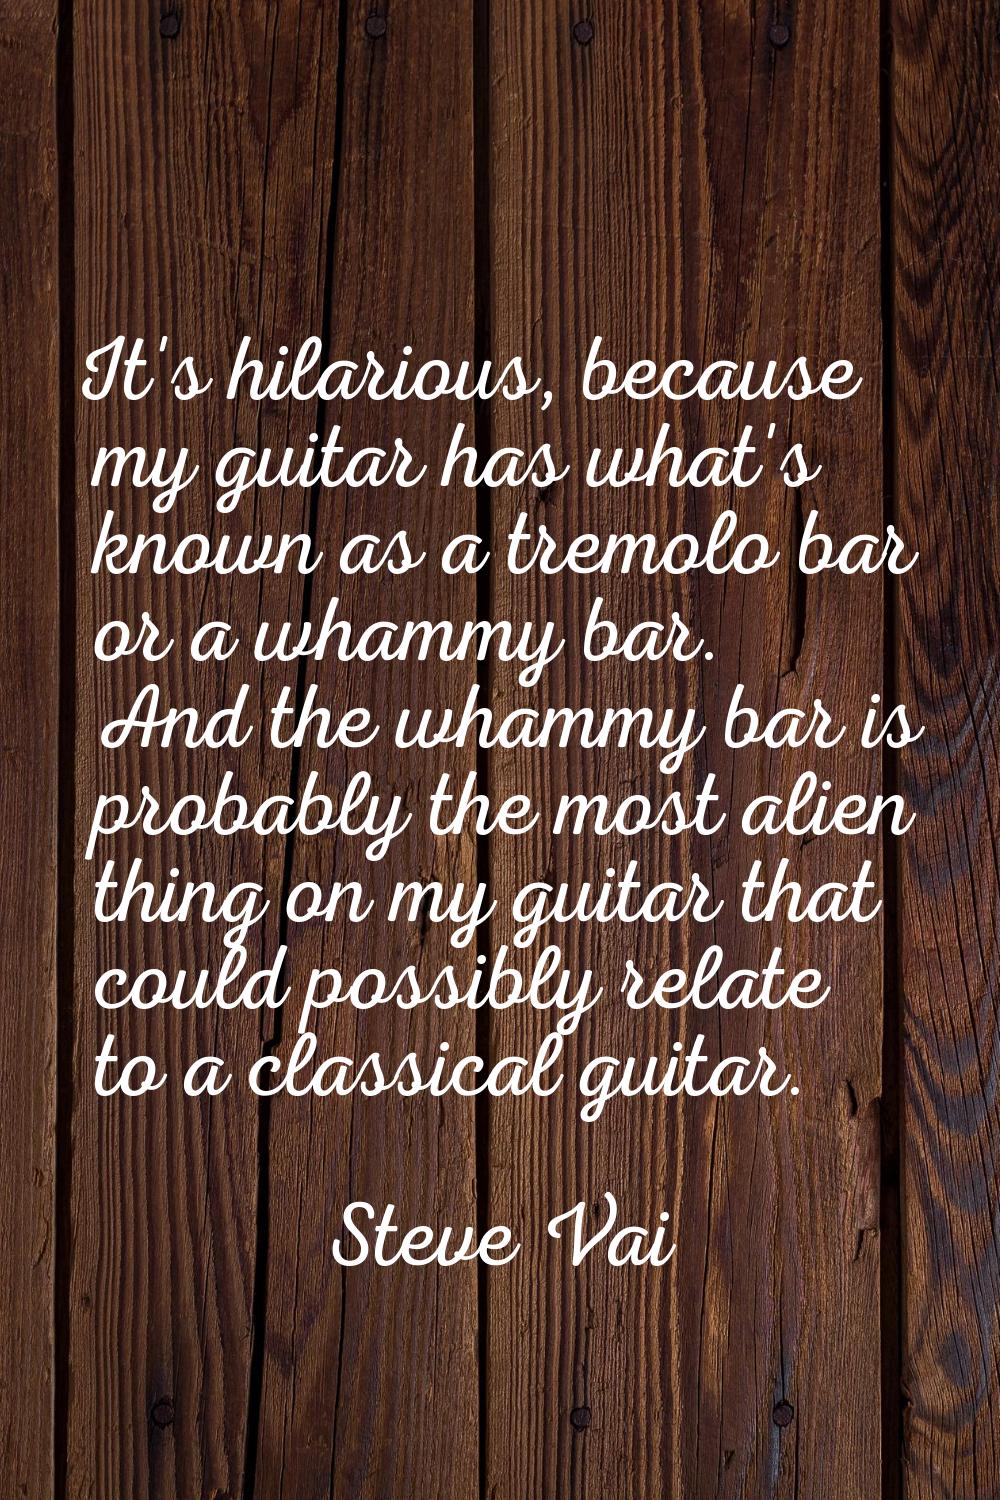 It's hilarious, because my guitar has what's known as a tremolo bar or a whammy bar. And the whammy